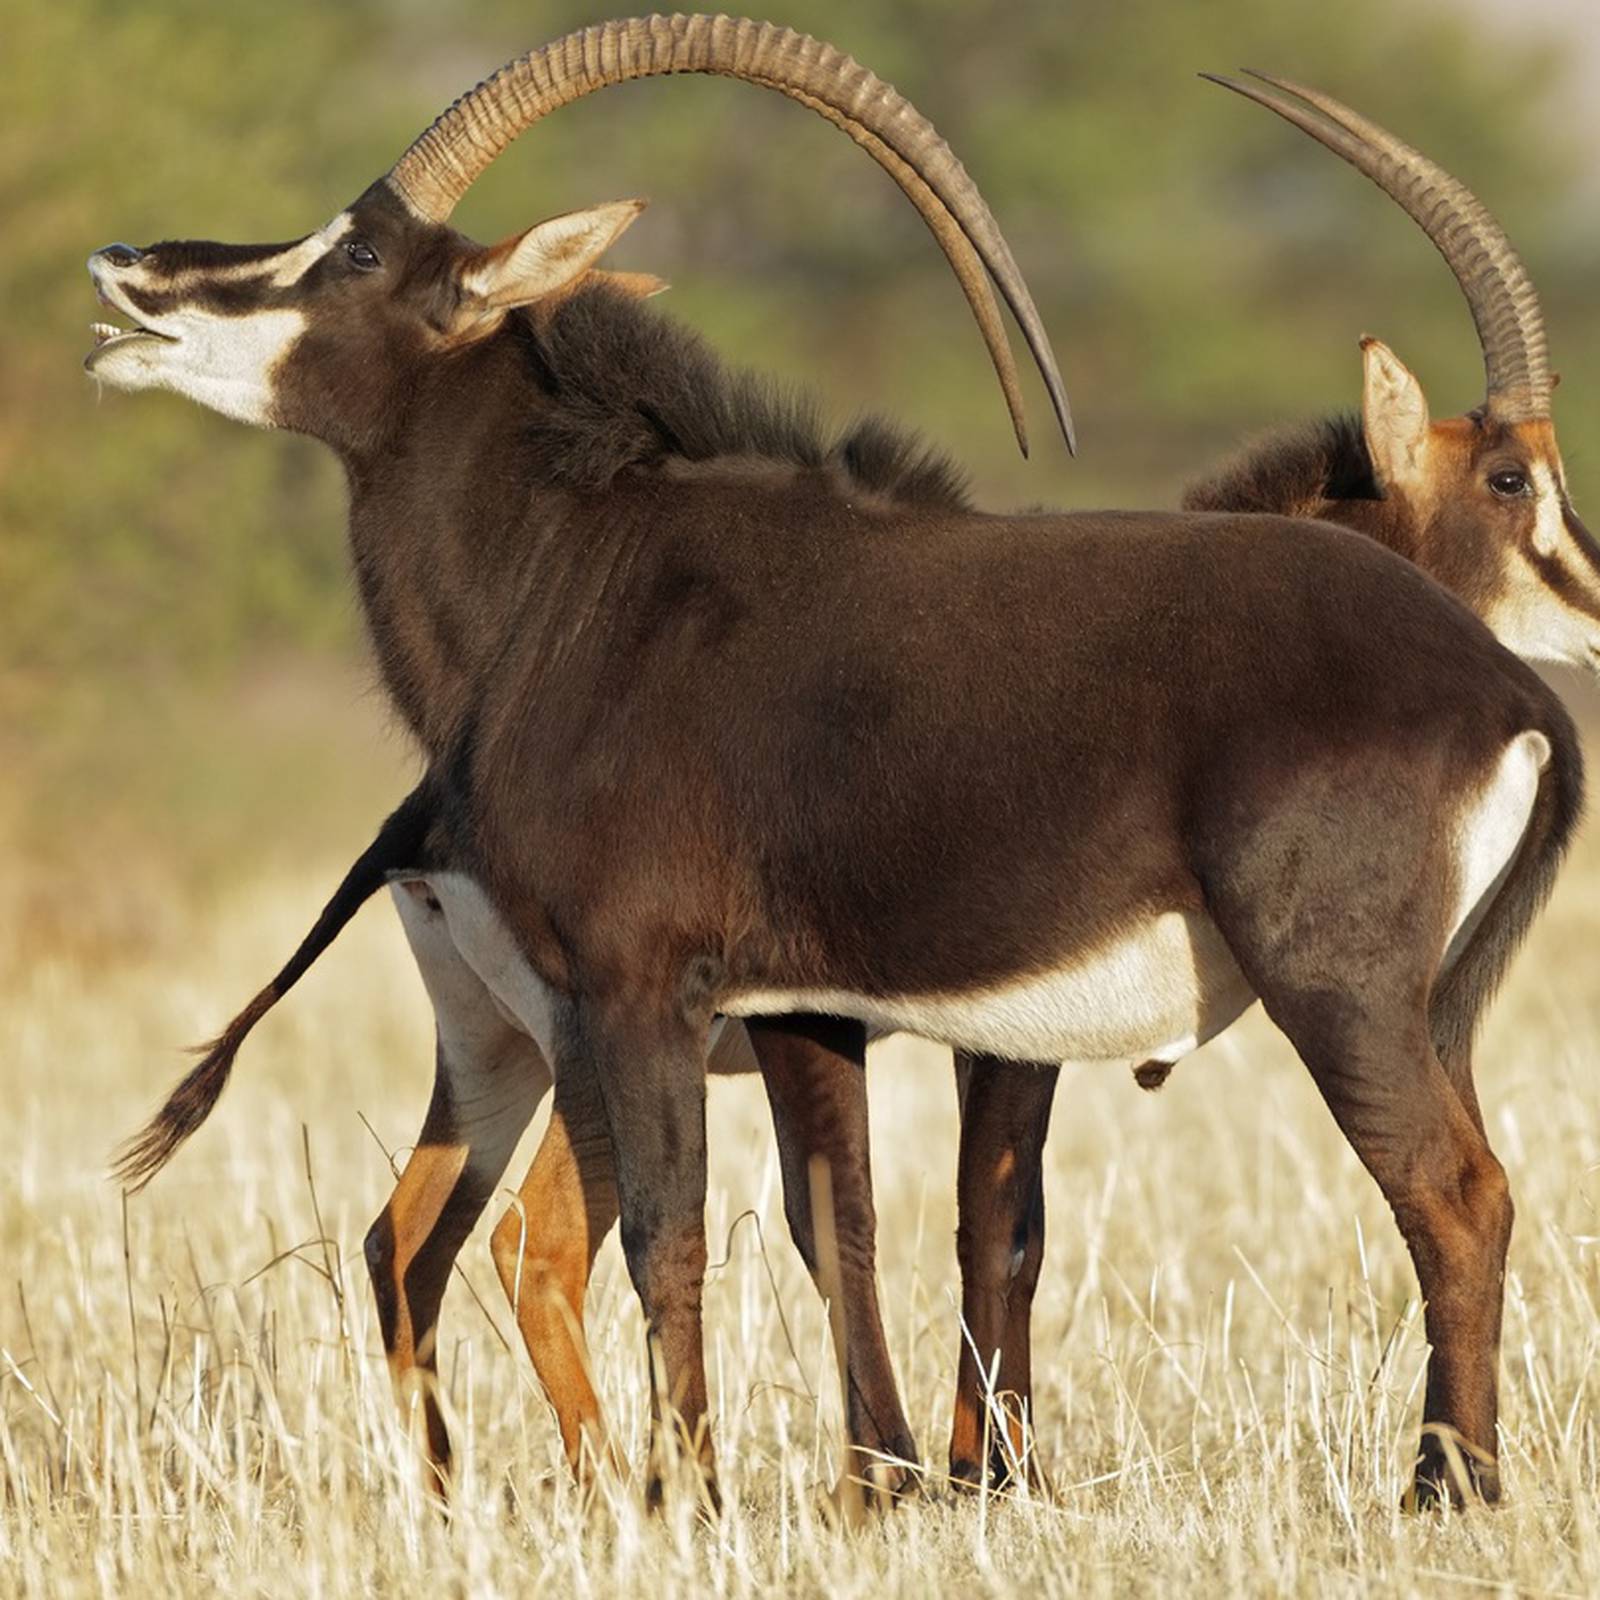 Antelope sold at game auction in South Africa for € – The Irish Times